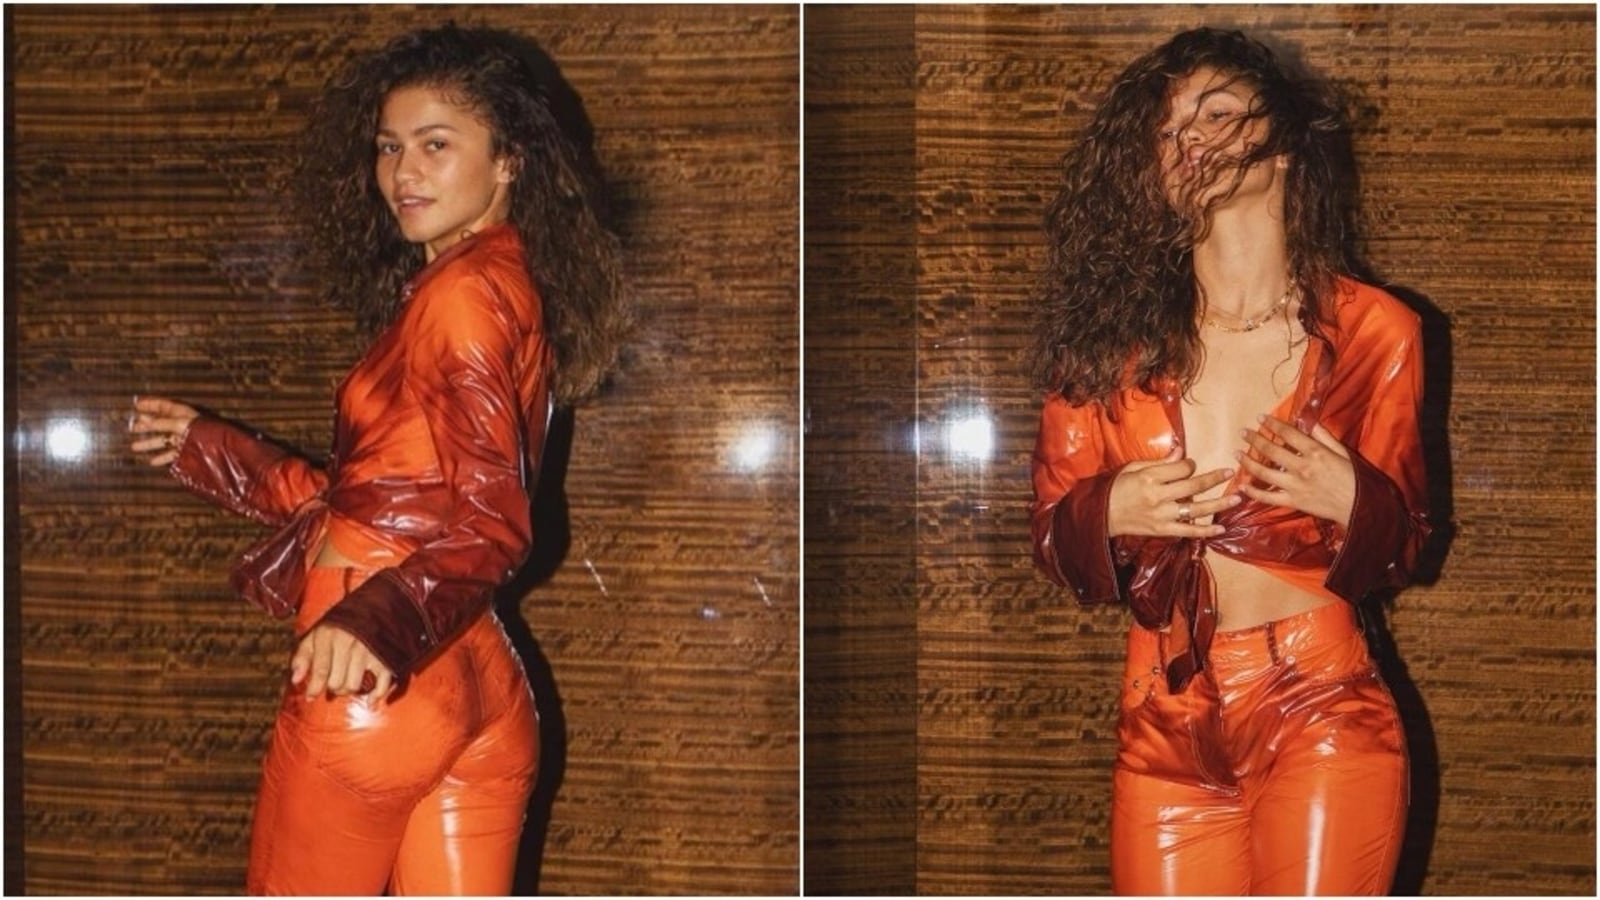 zendaya-s-sultry-avatar-in-faux-leather-tie-top-and-pants-has-internet-asking-is-tom-holland-still-breathing-all-pics